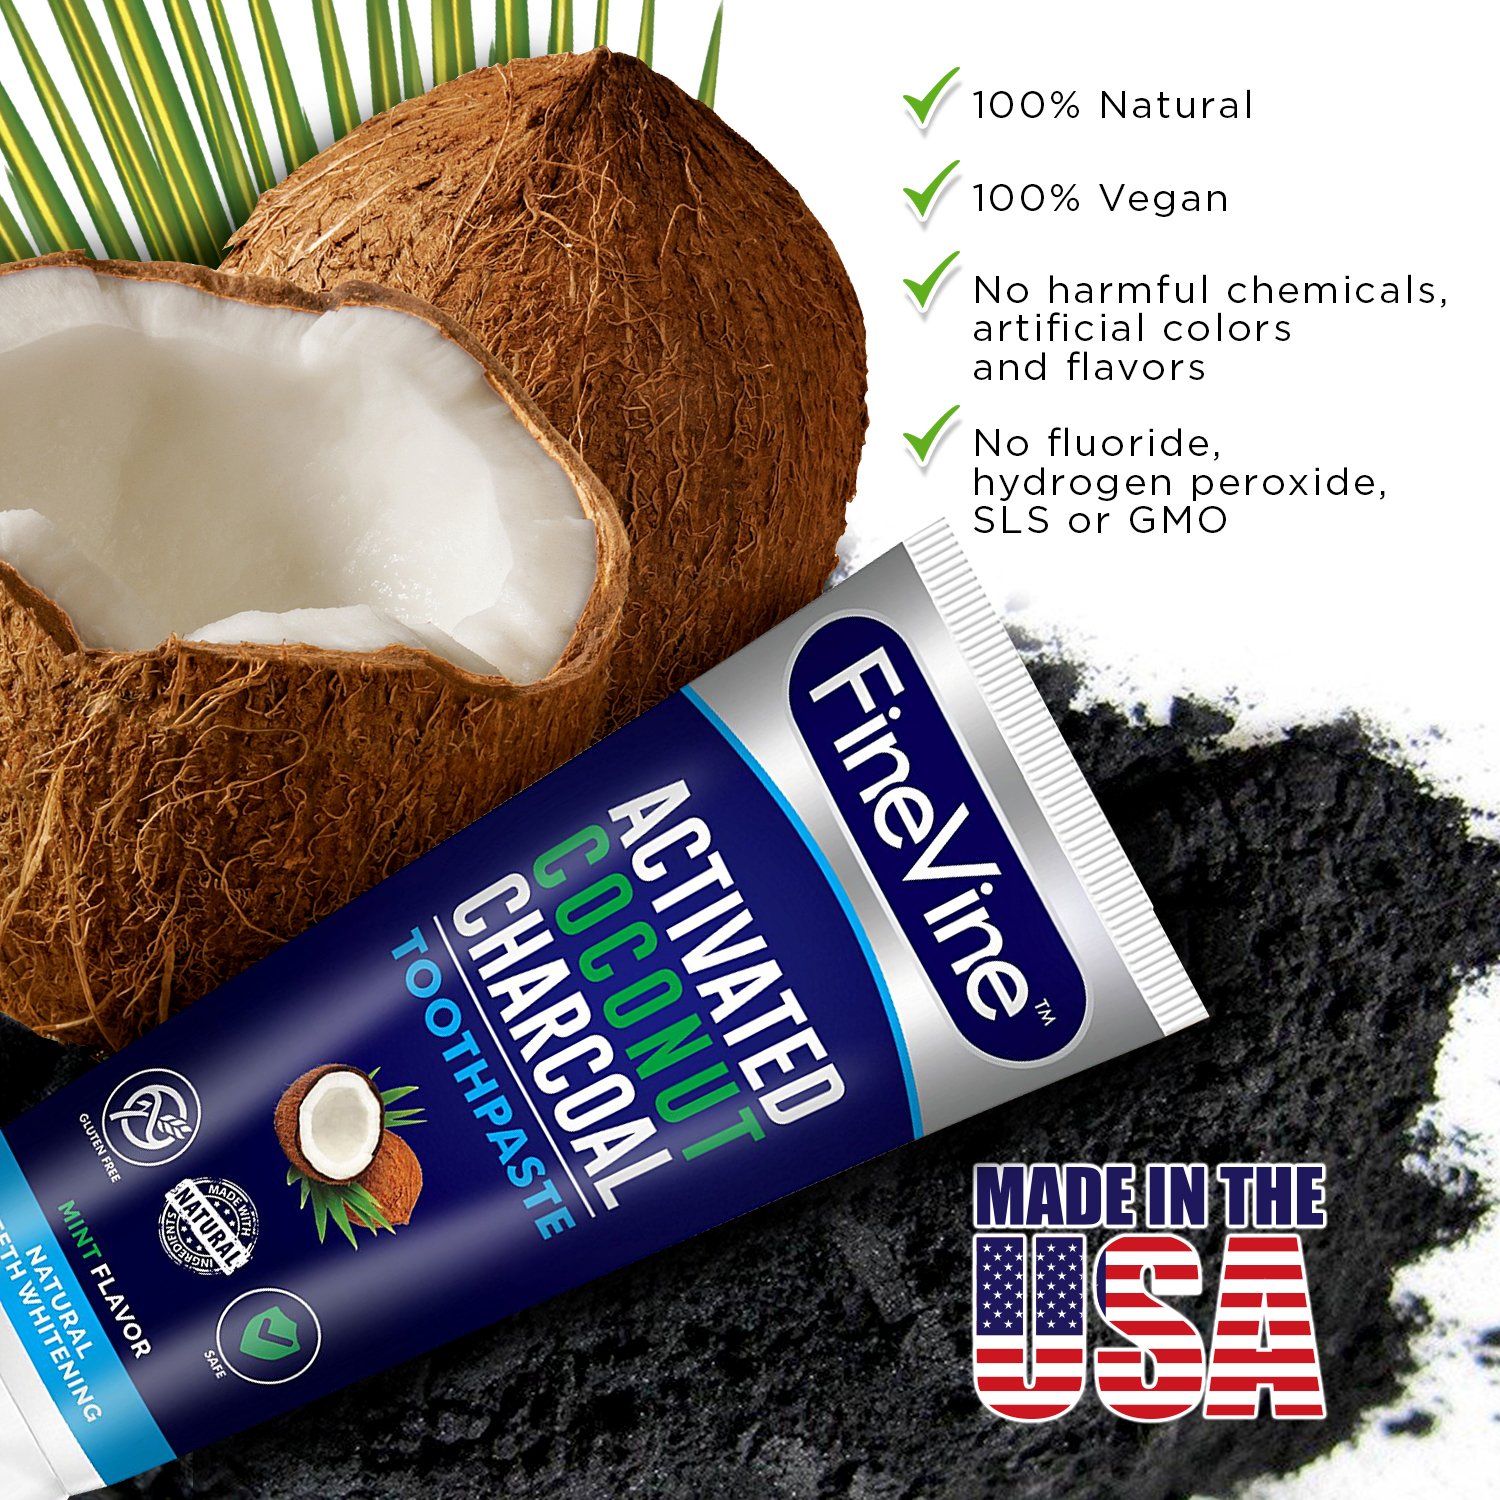 100% Natural Charcoal Teeth Whitening Toothpaste| Charcoal Toothpaste Made in USA| Acti-vated Charcoal Toothpaste for Healthy Gums & Pearly Whites| Organic Vegan Coconut Char-coal Toothpaste Whitening